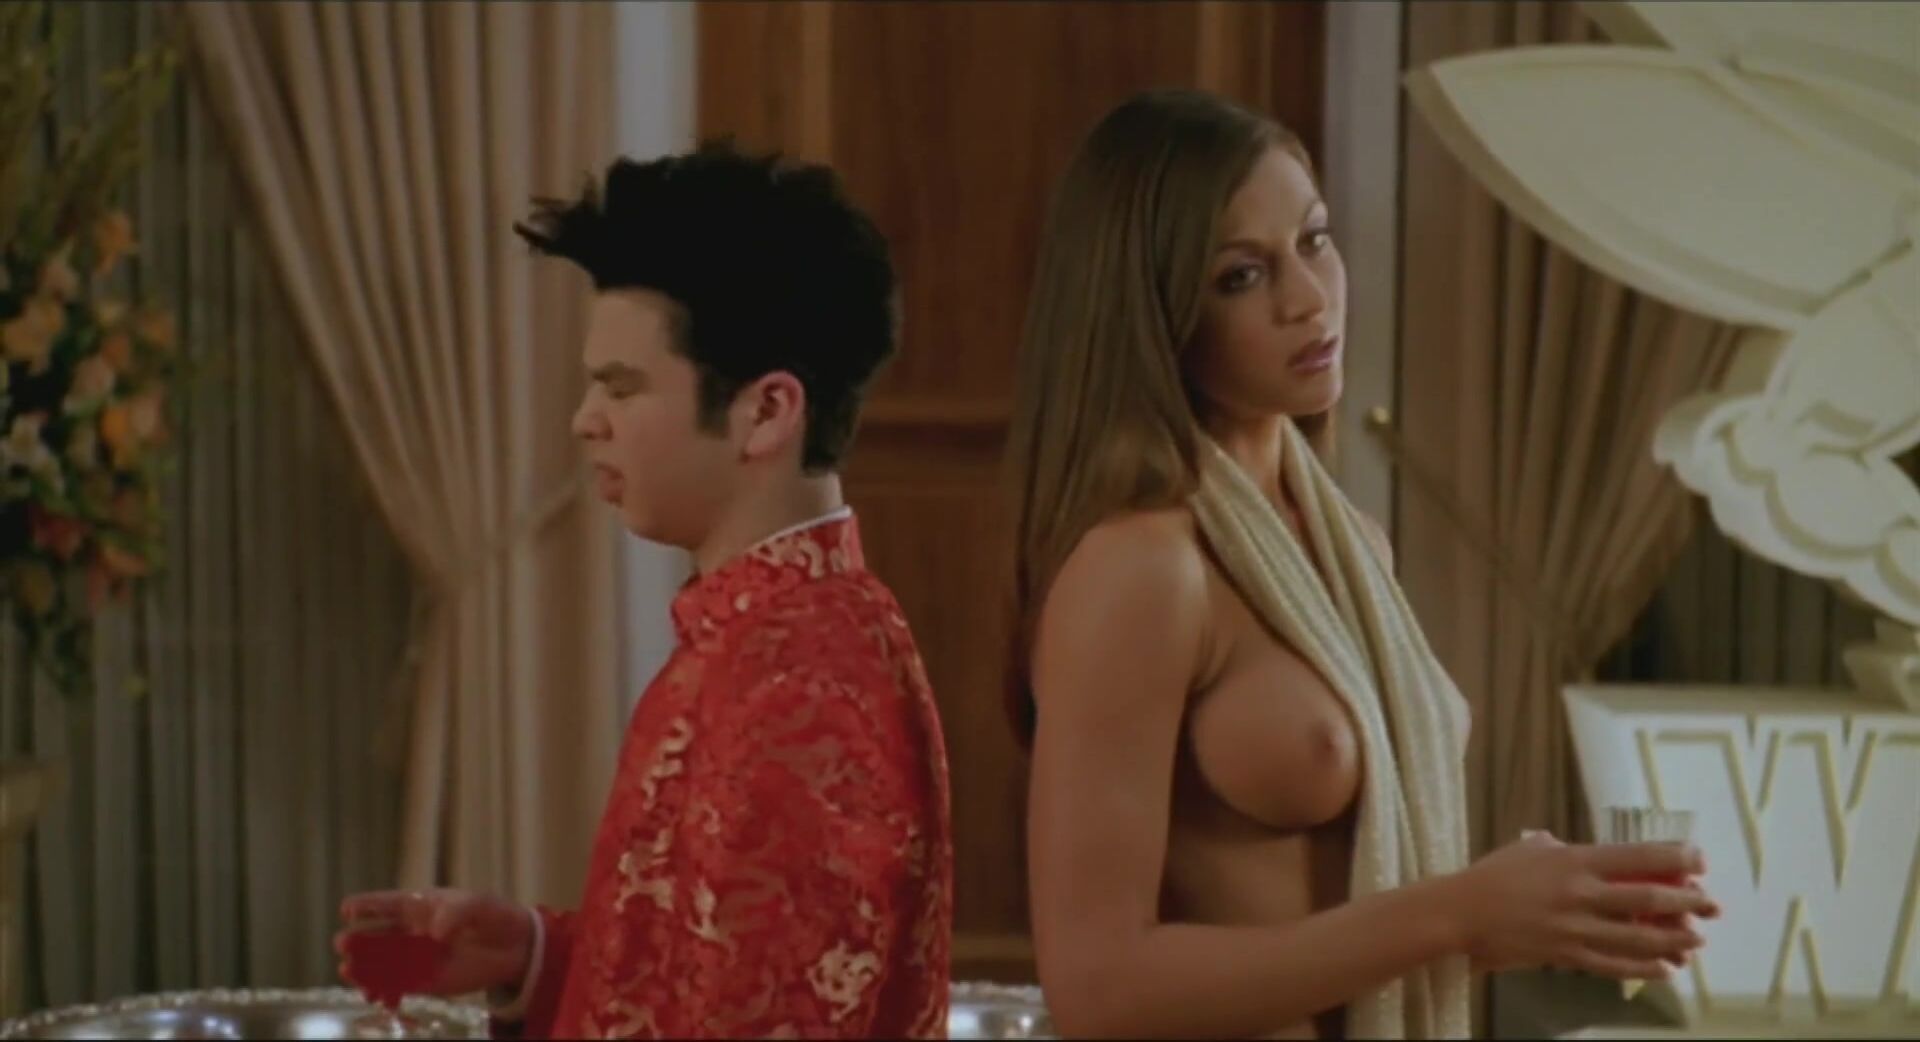 Bigcocks Slender Cerina Vincent dislikes wearing clothes in Not Another Teen Movie (2001) HClips